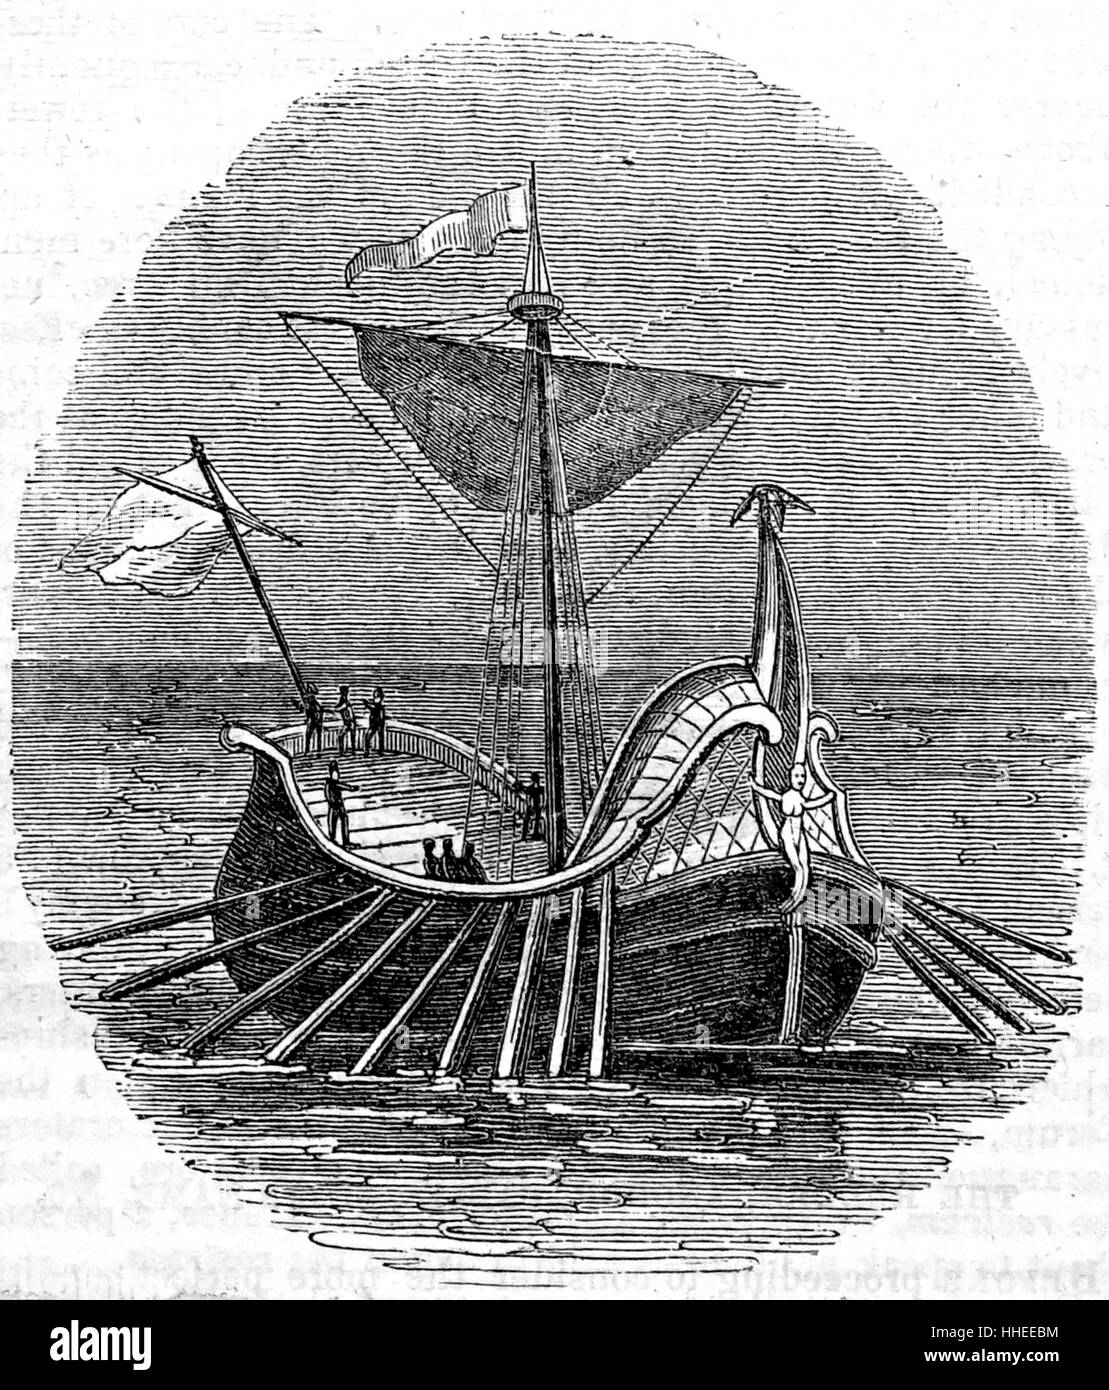 Engraving of a Figurehead, a carved wooden decoration found at the prow of ships largely made between the 16th and 20th centuries. Dated 19th Century Stock Photo